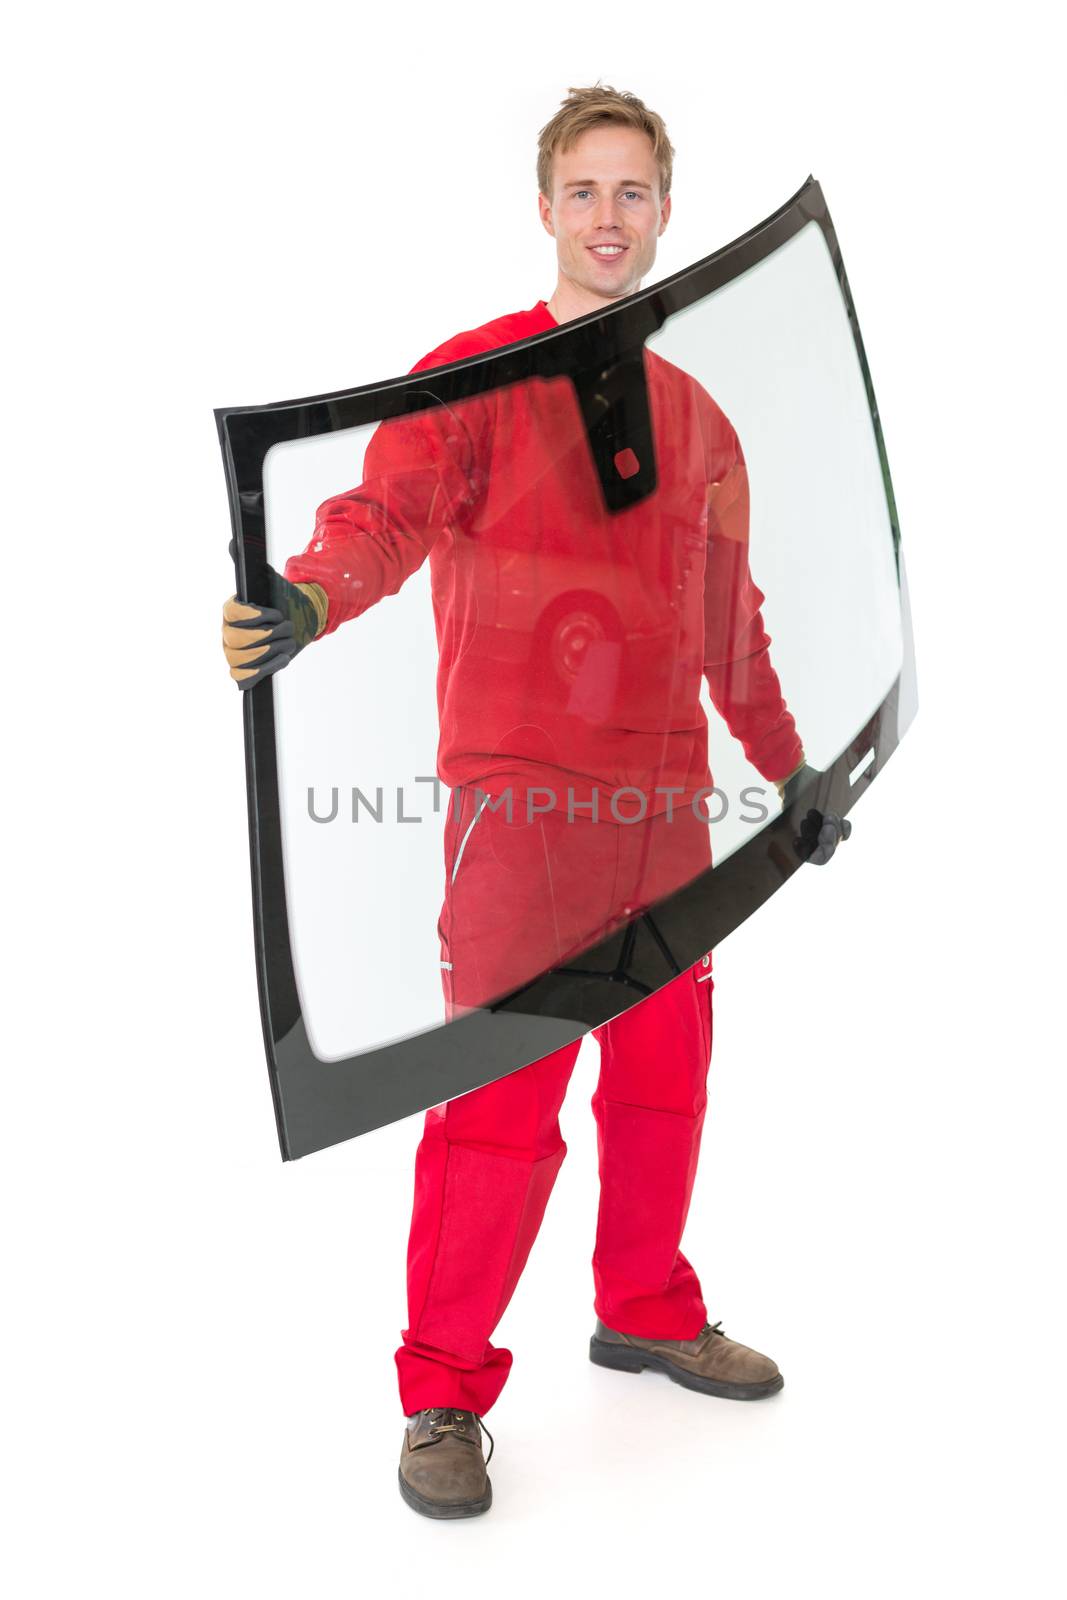 Worker glazier's workshop with car windscreen or windshield isolated in front of white background